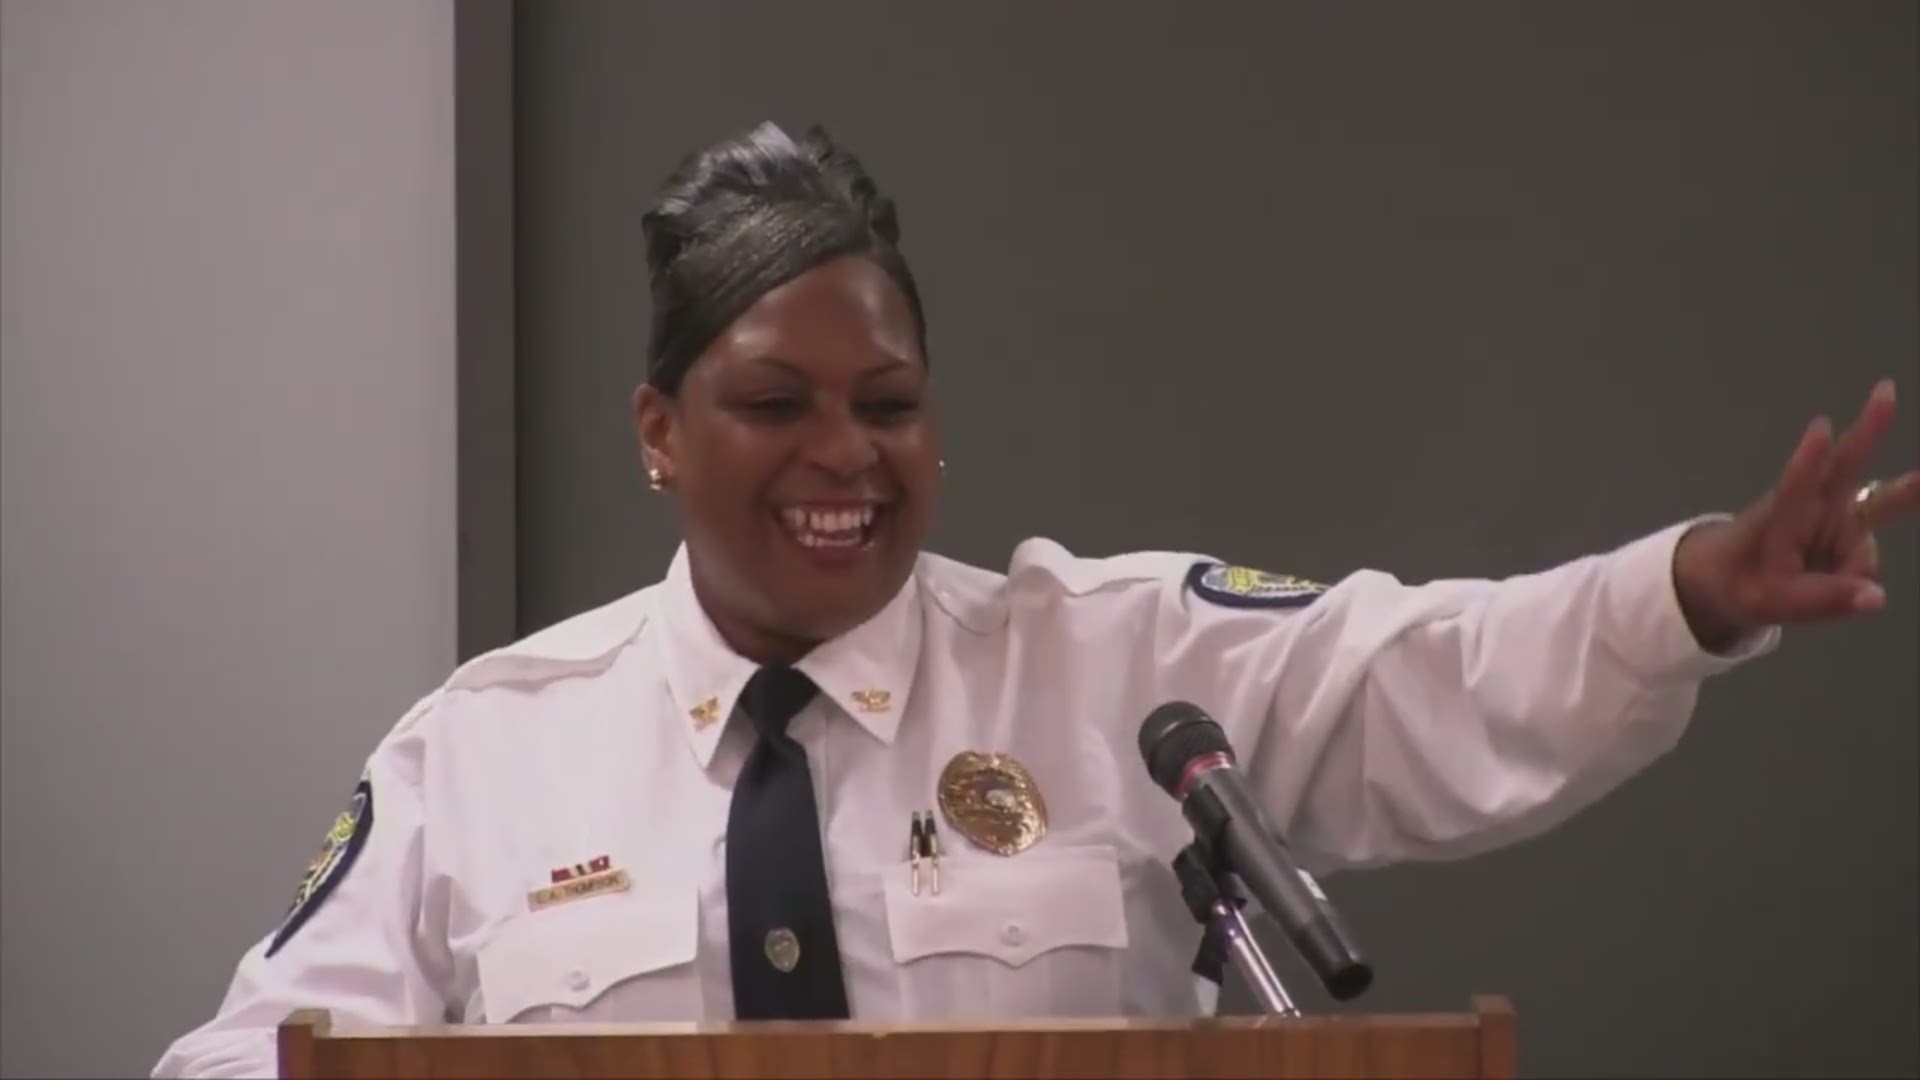 Turn up your speakers! The Winston-Salem Police Department brought the whole freaking house for their lip sync challenge and it's all that.